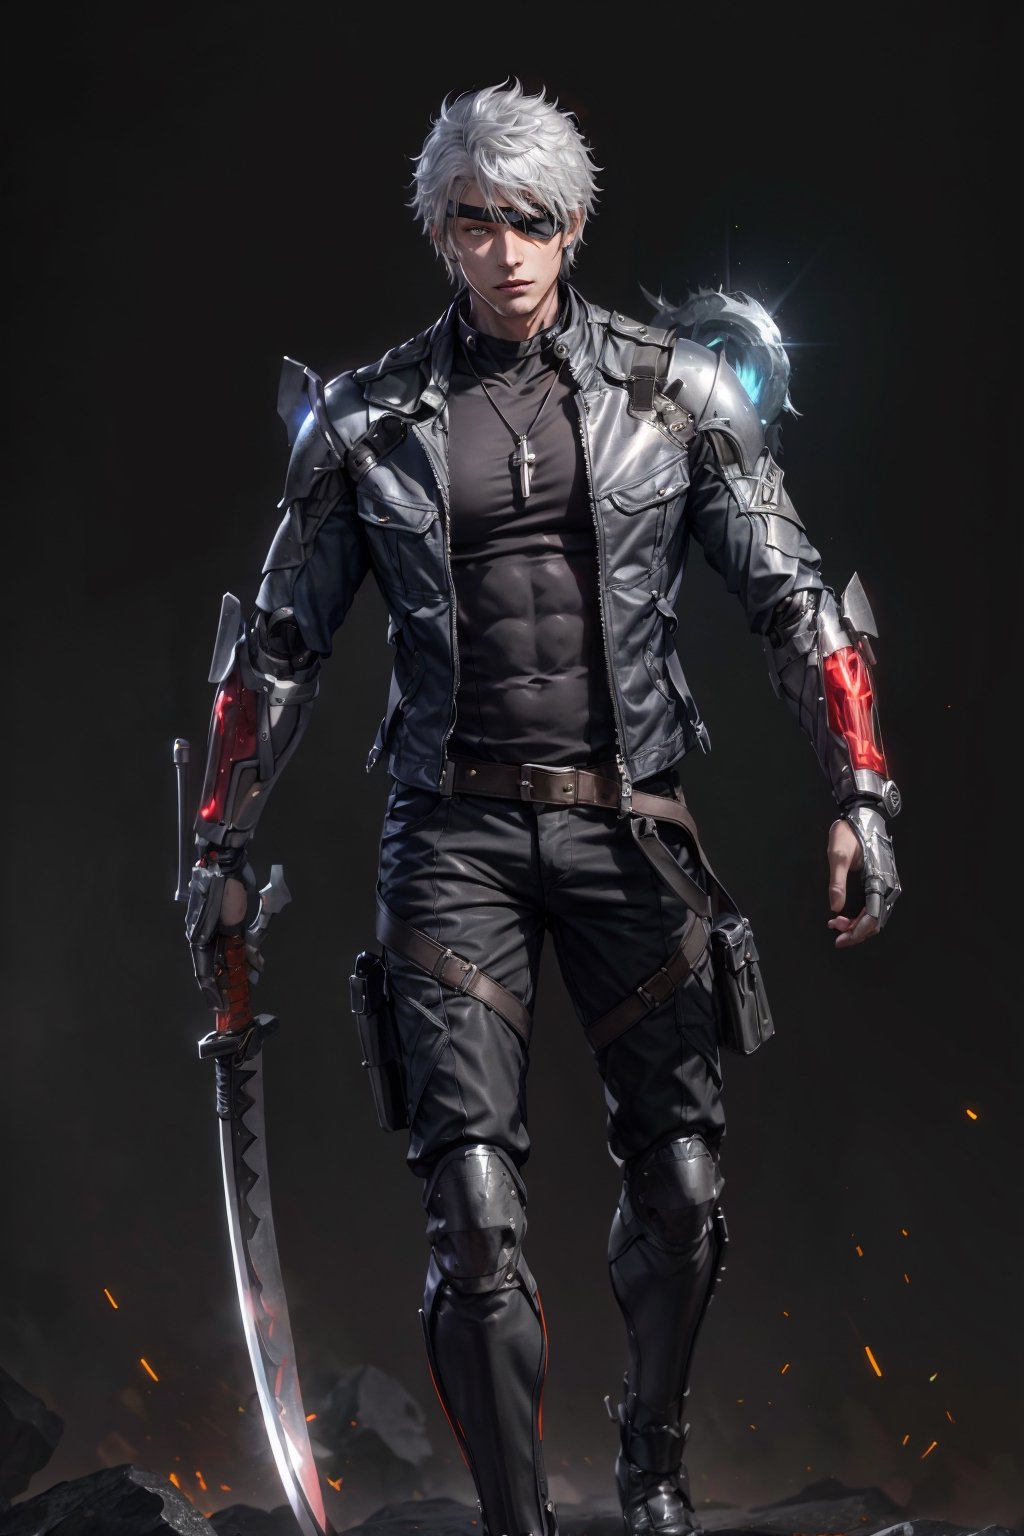 an accurate and detailed full-body shot of a male superhero character named Raider, 1male, Brushed forward spiked white hair, Blue Eyes, (Black tactical eye patch on left eye:1.2), silver pendant necklace, (Black and orange exoskeleton body suit:1.2), (Sleek black and red leather jacket with integrated metallic plating:1.2), Red and white chest plate, (Cybernetic devil gauntlets with glowing red designs:1.3), (Studded leather belt), Blue-gray cargo pants with reinforced leg armor, Gunmetal gray armored greaves, Black combat boots, (holding a High-frequency katana infused with demonic energy), masterpiece, high quality, 4K, raidenmgr, nero